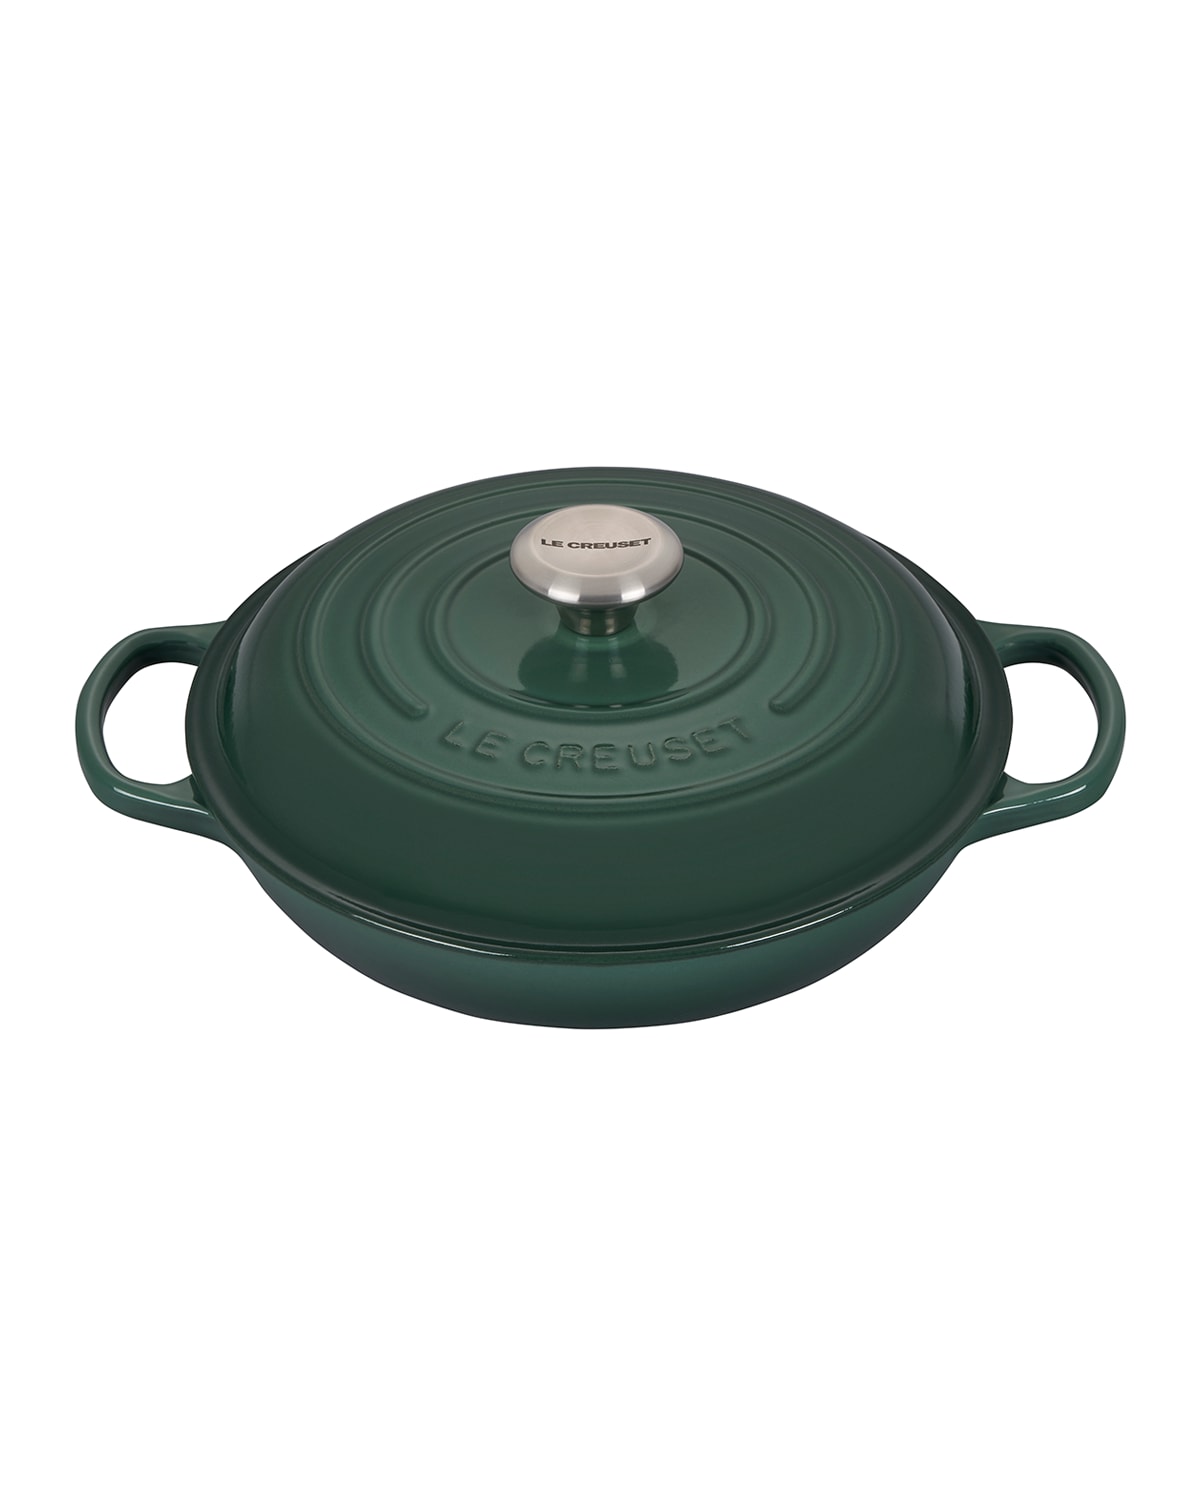 LE CREUSET 2.25-QT. SIGNATURE BRAISER WITH STAINLESS STEEL KNOB